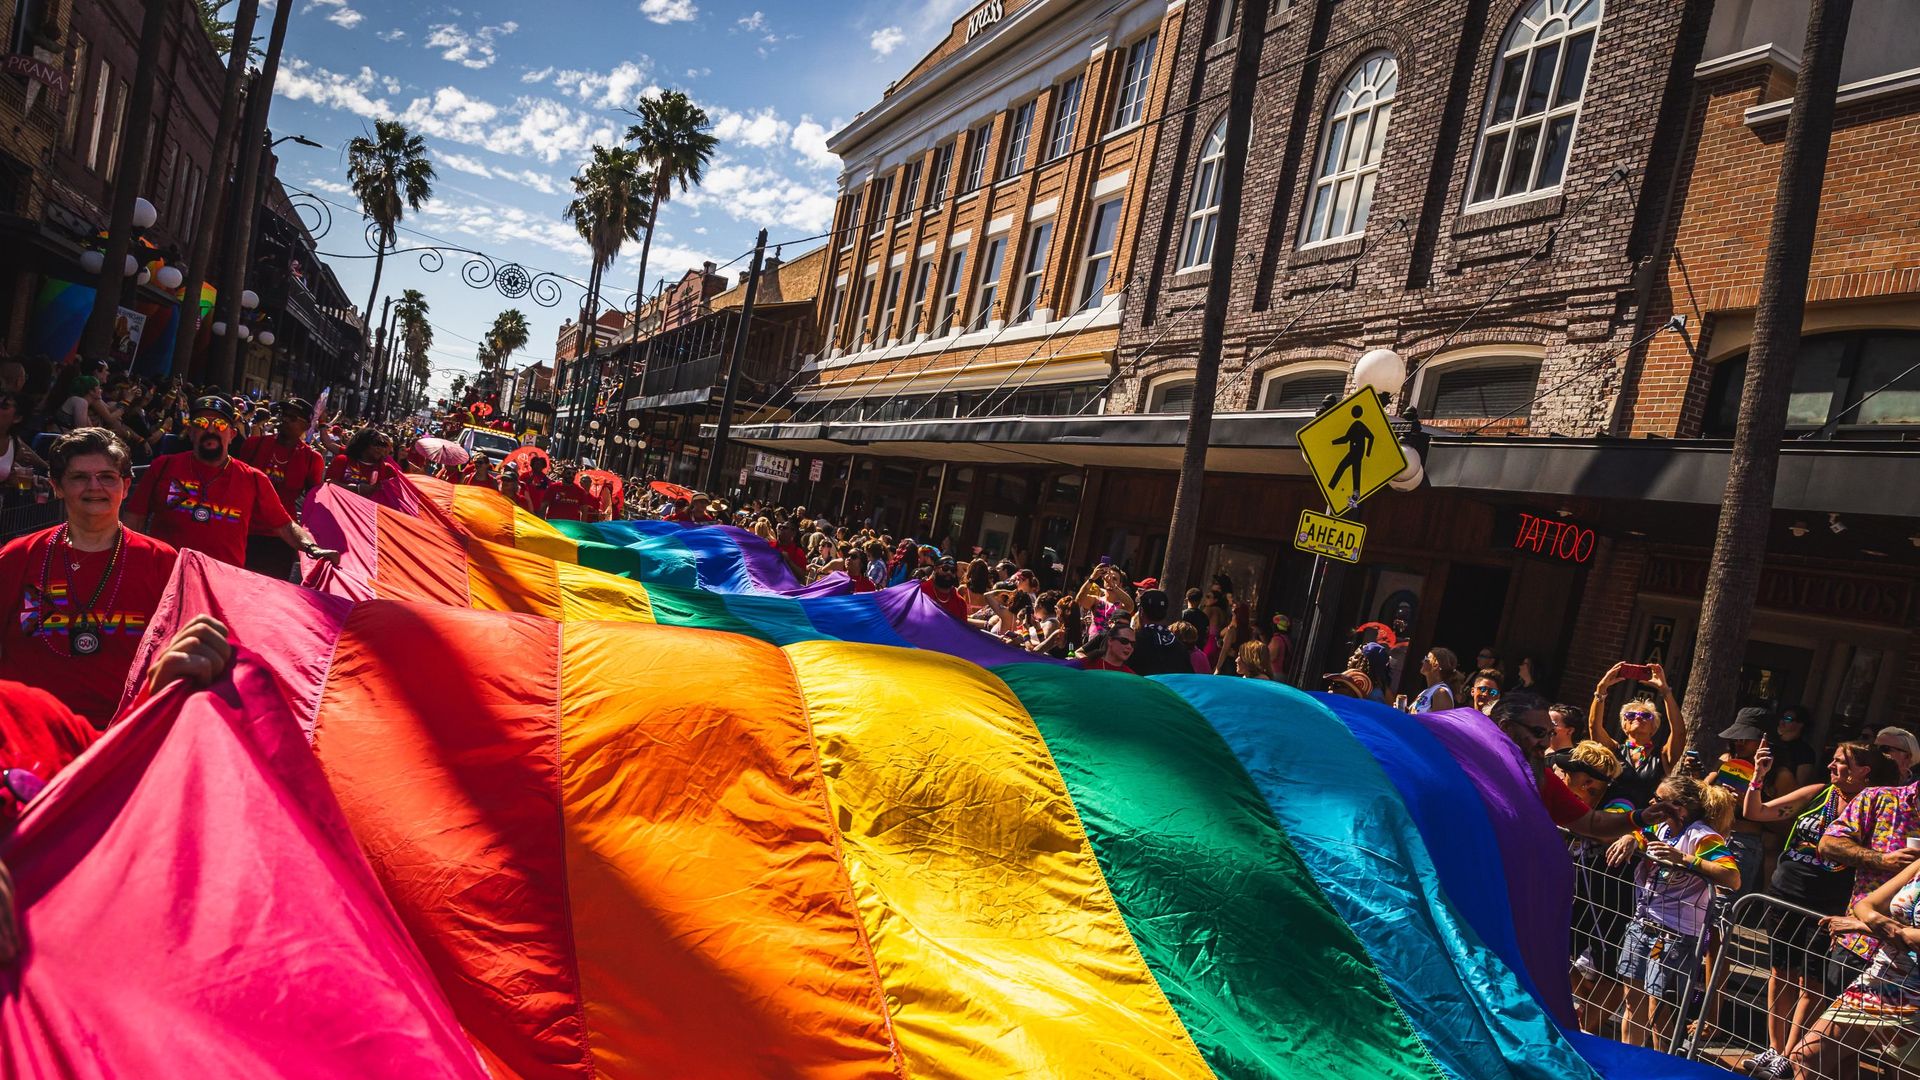 a large rainbow flag being carried during the pride parade in ybor